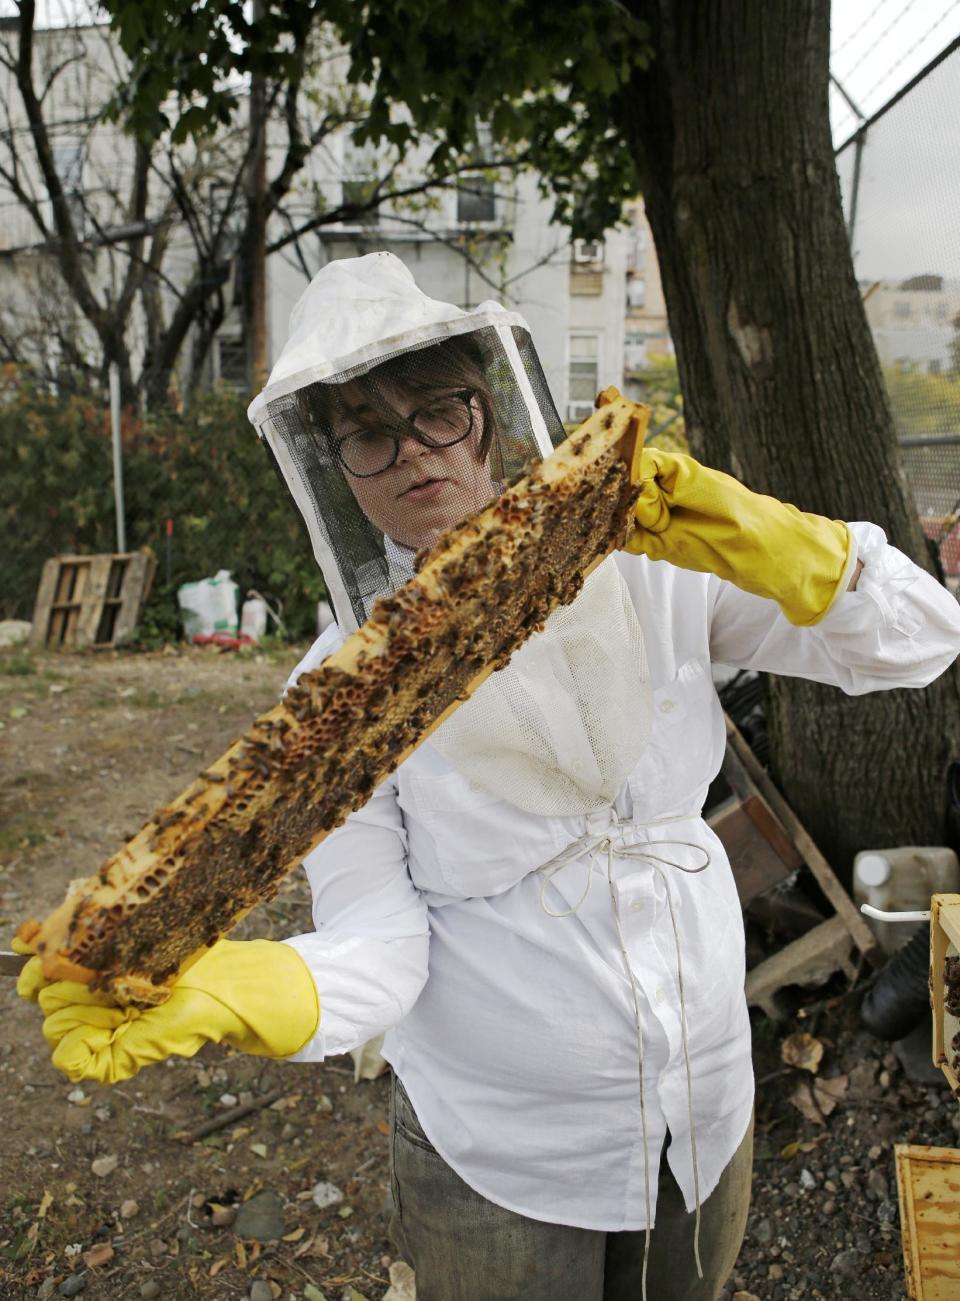 In this Wednesday, Oct. 16, 2013 photo, Beekeeper Kellen Henry inspects bees from her Feedback Farms hive in the Myrtle Village Green community garden in the Bedford-Stuyvesant section of Brooklyn, in New York. Though New York reversed a long-standing ban on tending to honeybees in 2010, there are issues beyond legality that potential beekeepers should consider. Beekeeping, especially in an urban area, requires space, time and cooperation with the surrounding community. (AP Photo/Kathy Willens)